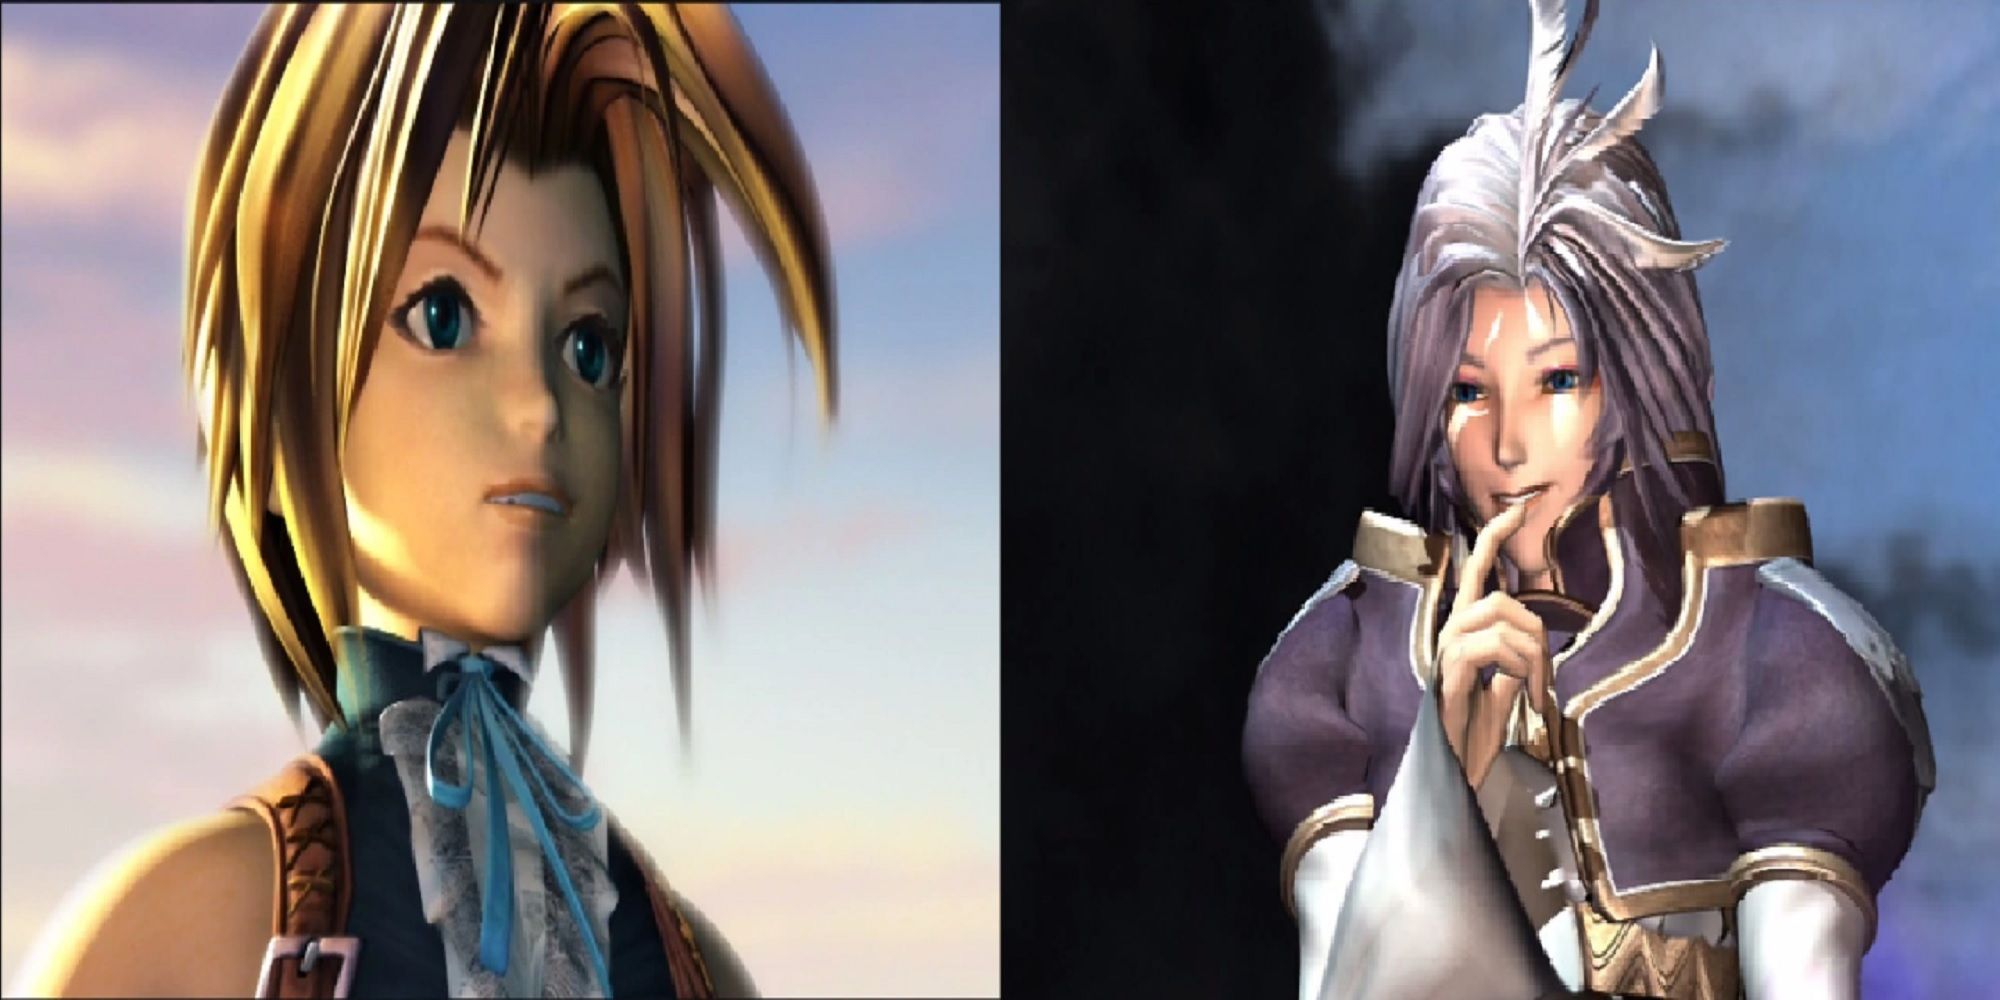 Final Fantasy 9 split image Zidane looking into the distance and Kuja looking down with a smirk